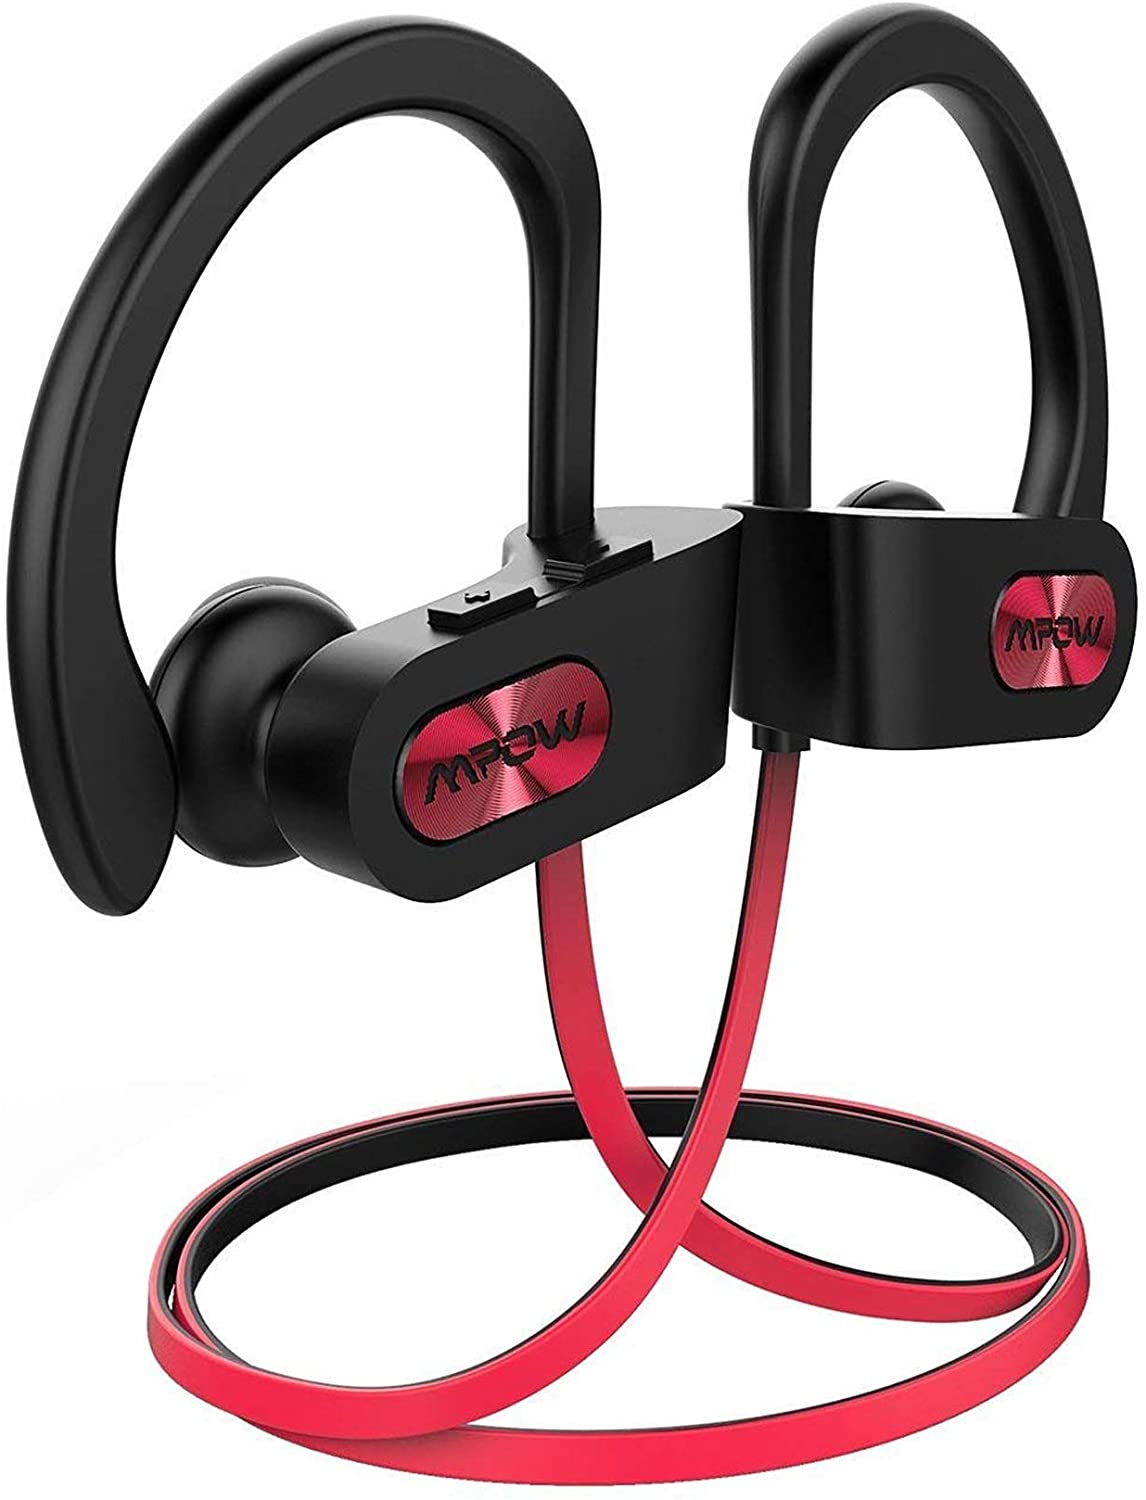 auriculares-bluetooth-para-moviles-mpow-flame-ipx7.jpg